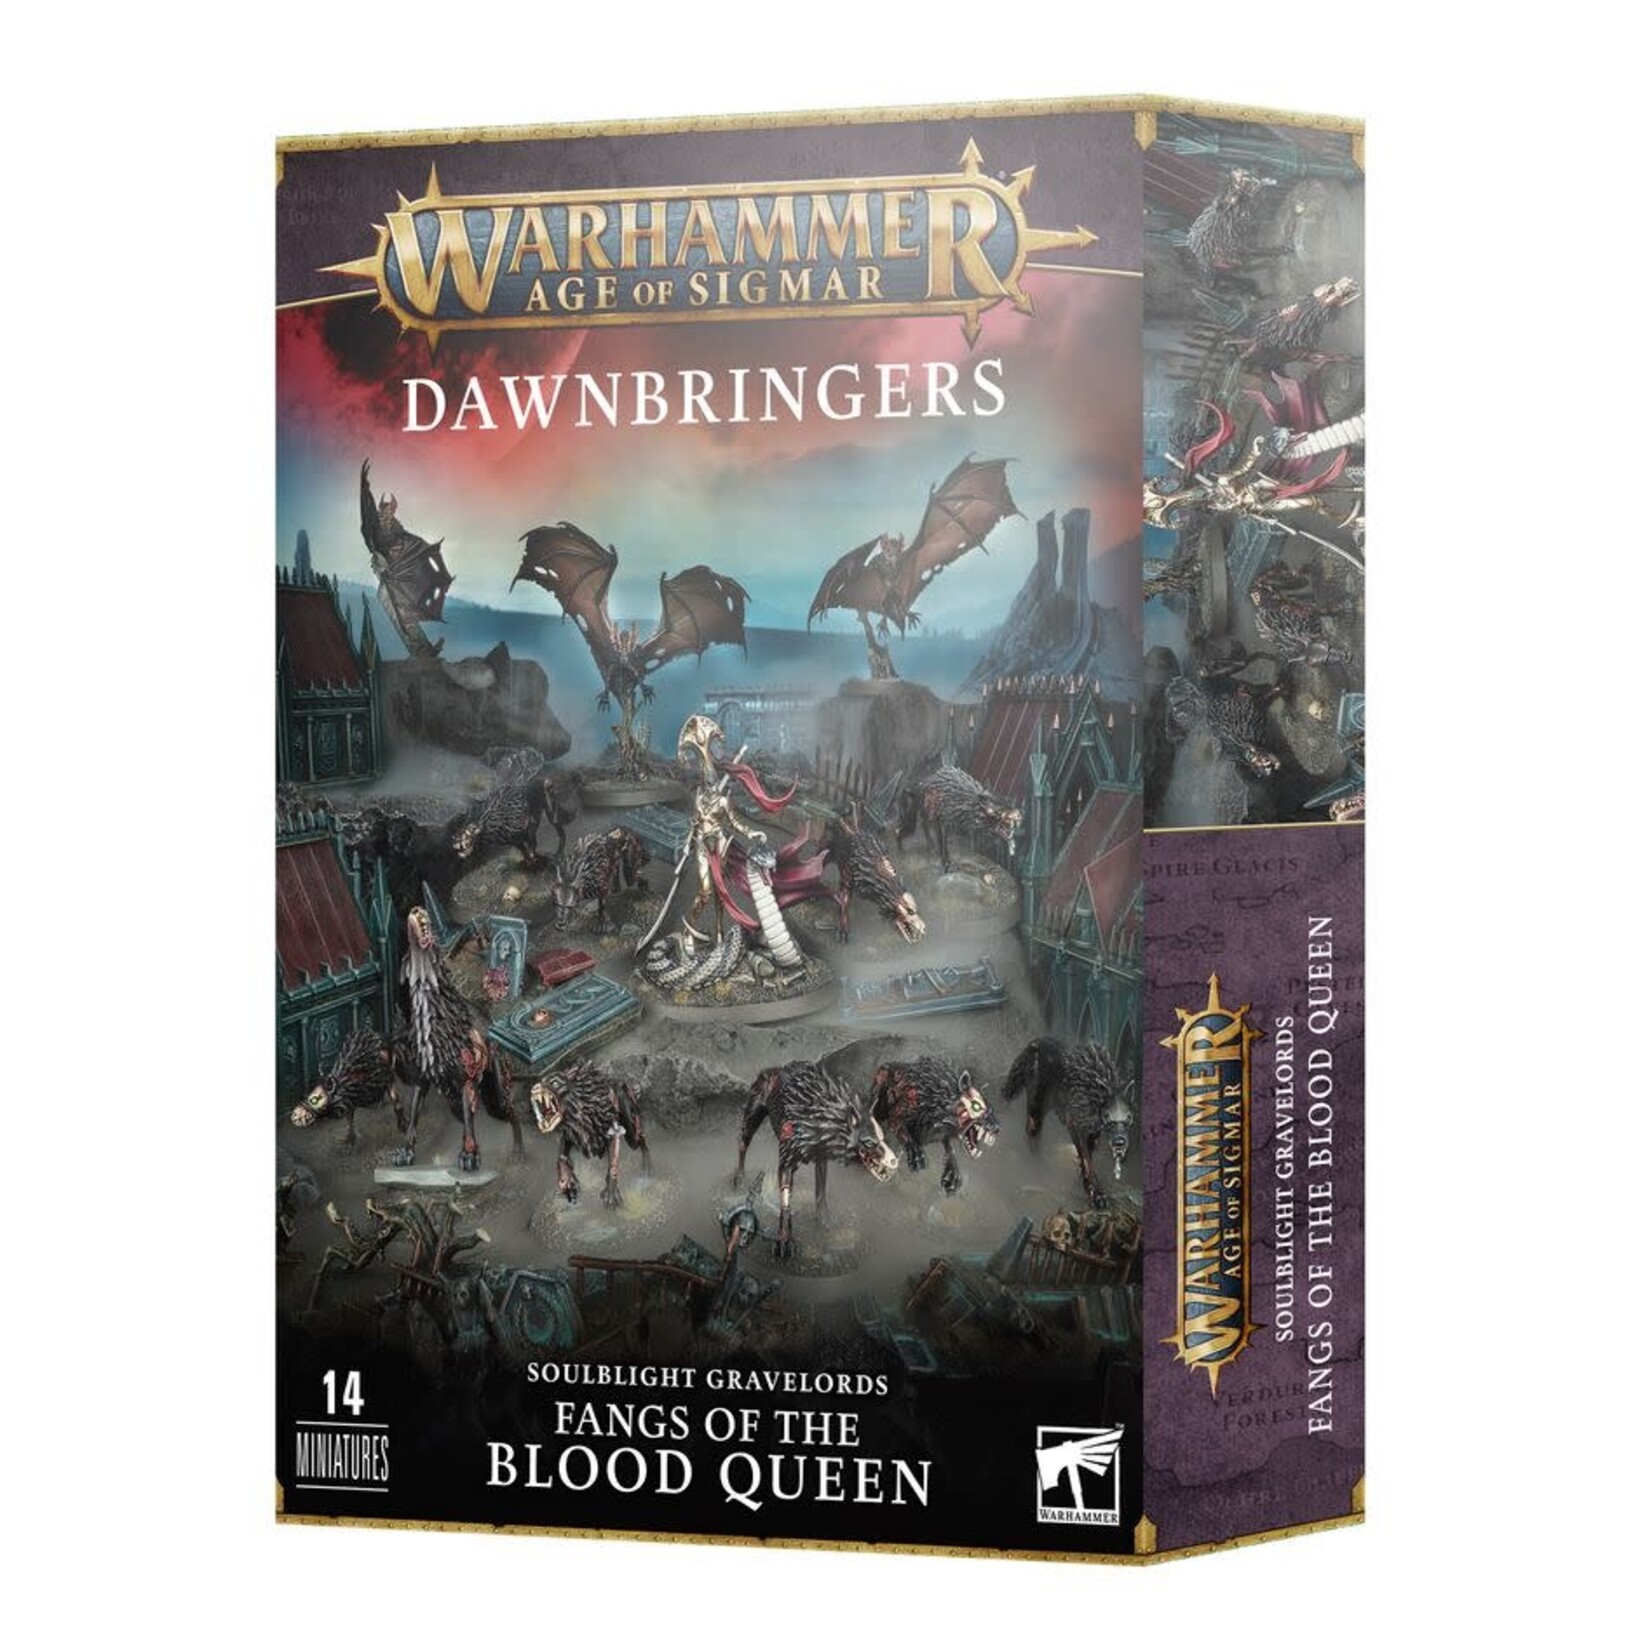 Age of Sigmar AoS Dawnbringers Soulblight Gravelords Fangs of the Blood Queen